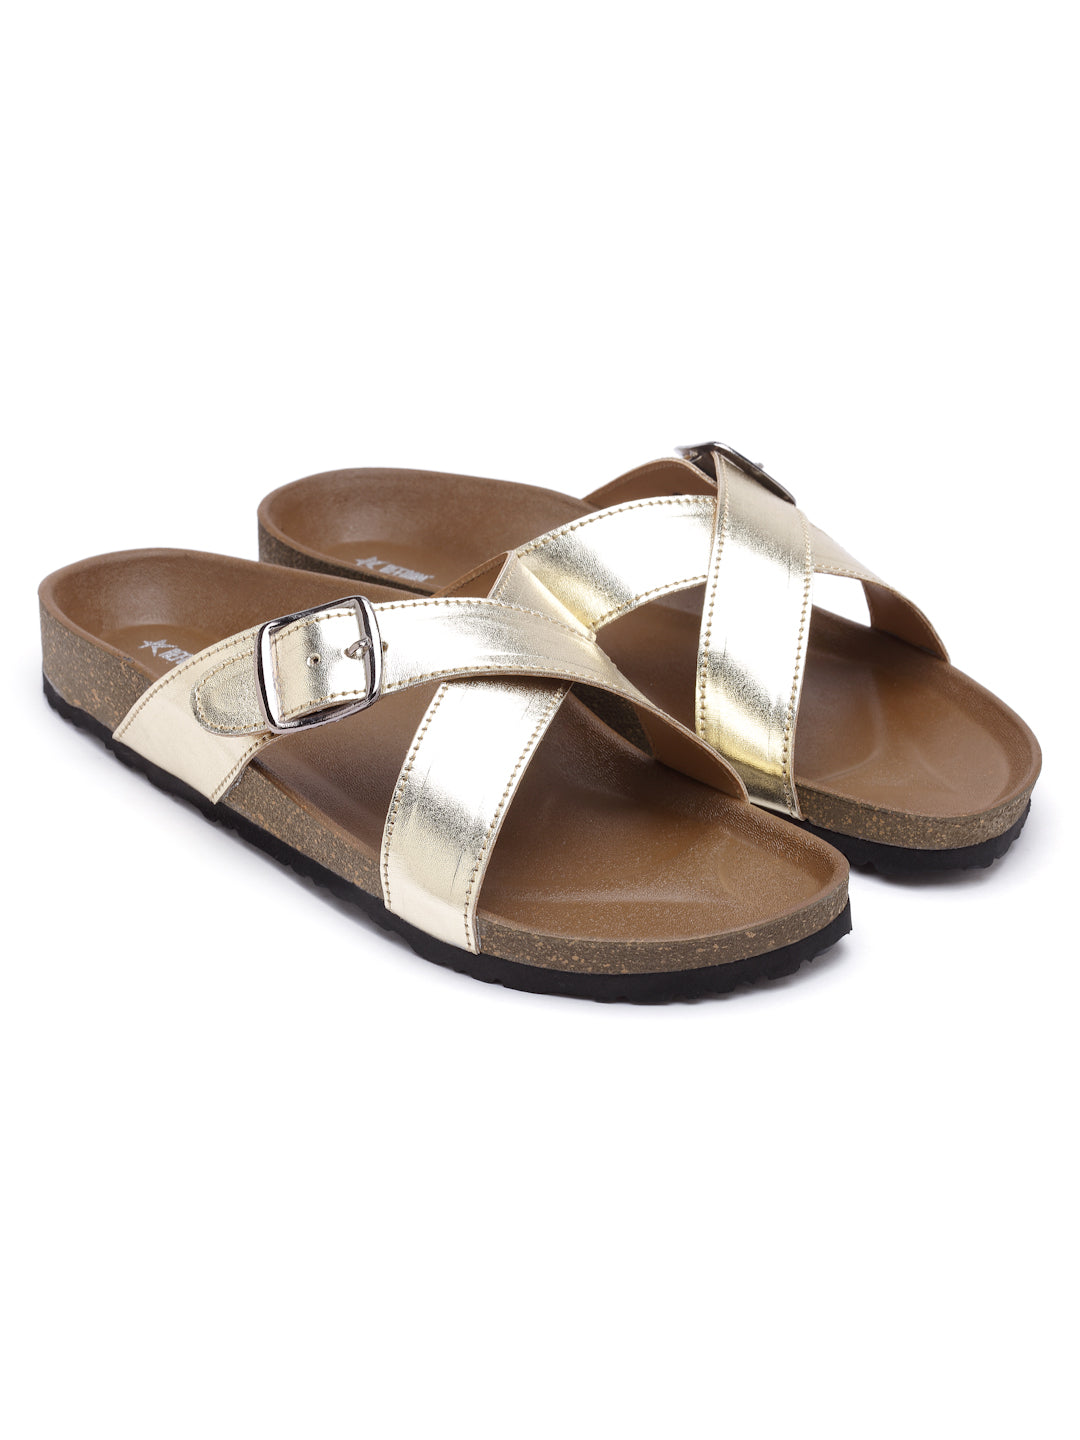 Women's Stylish Gold Synthetic Leather Casual Sandal